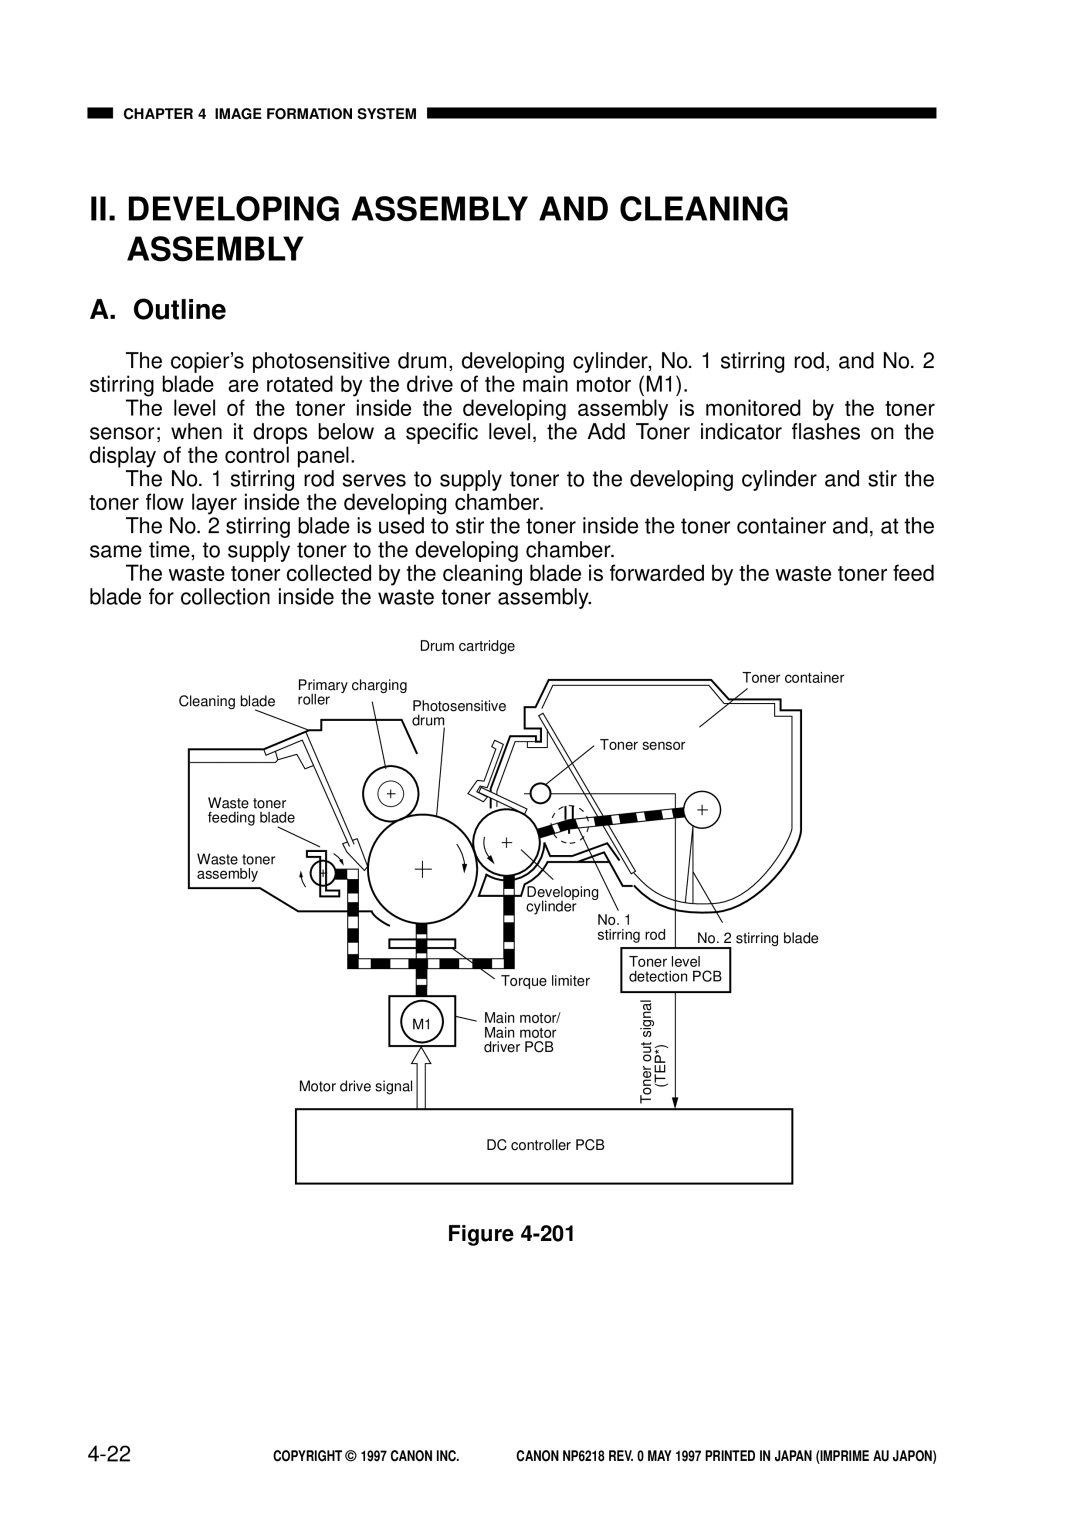 Canon NP6218, FY8-13EX-000 service manual Ii. Developing Assembly And Cleaning Assembly, 4-22, A. Outline, Toner container 